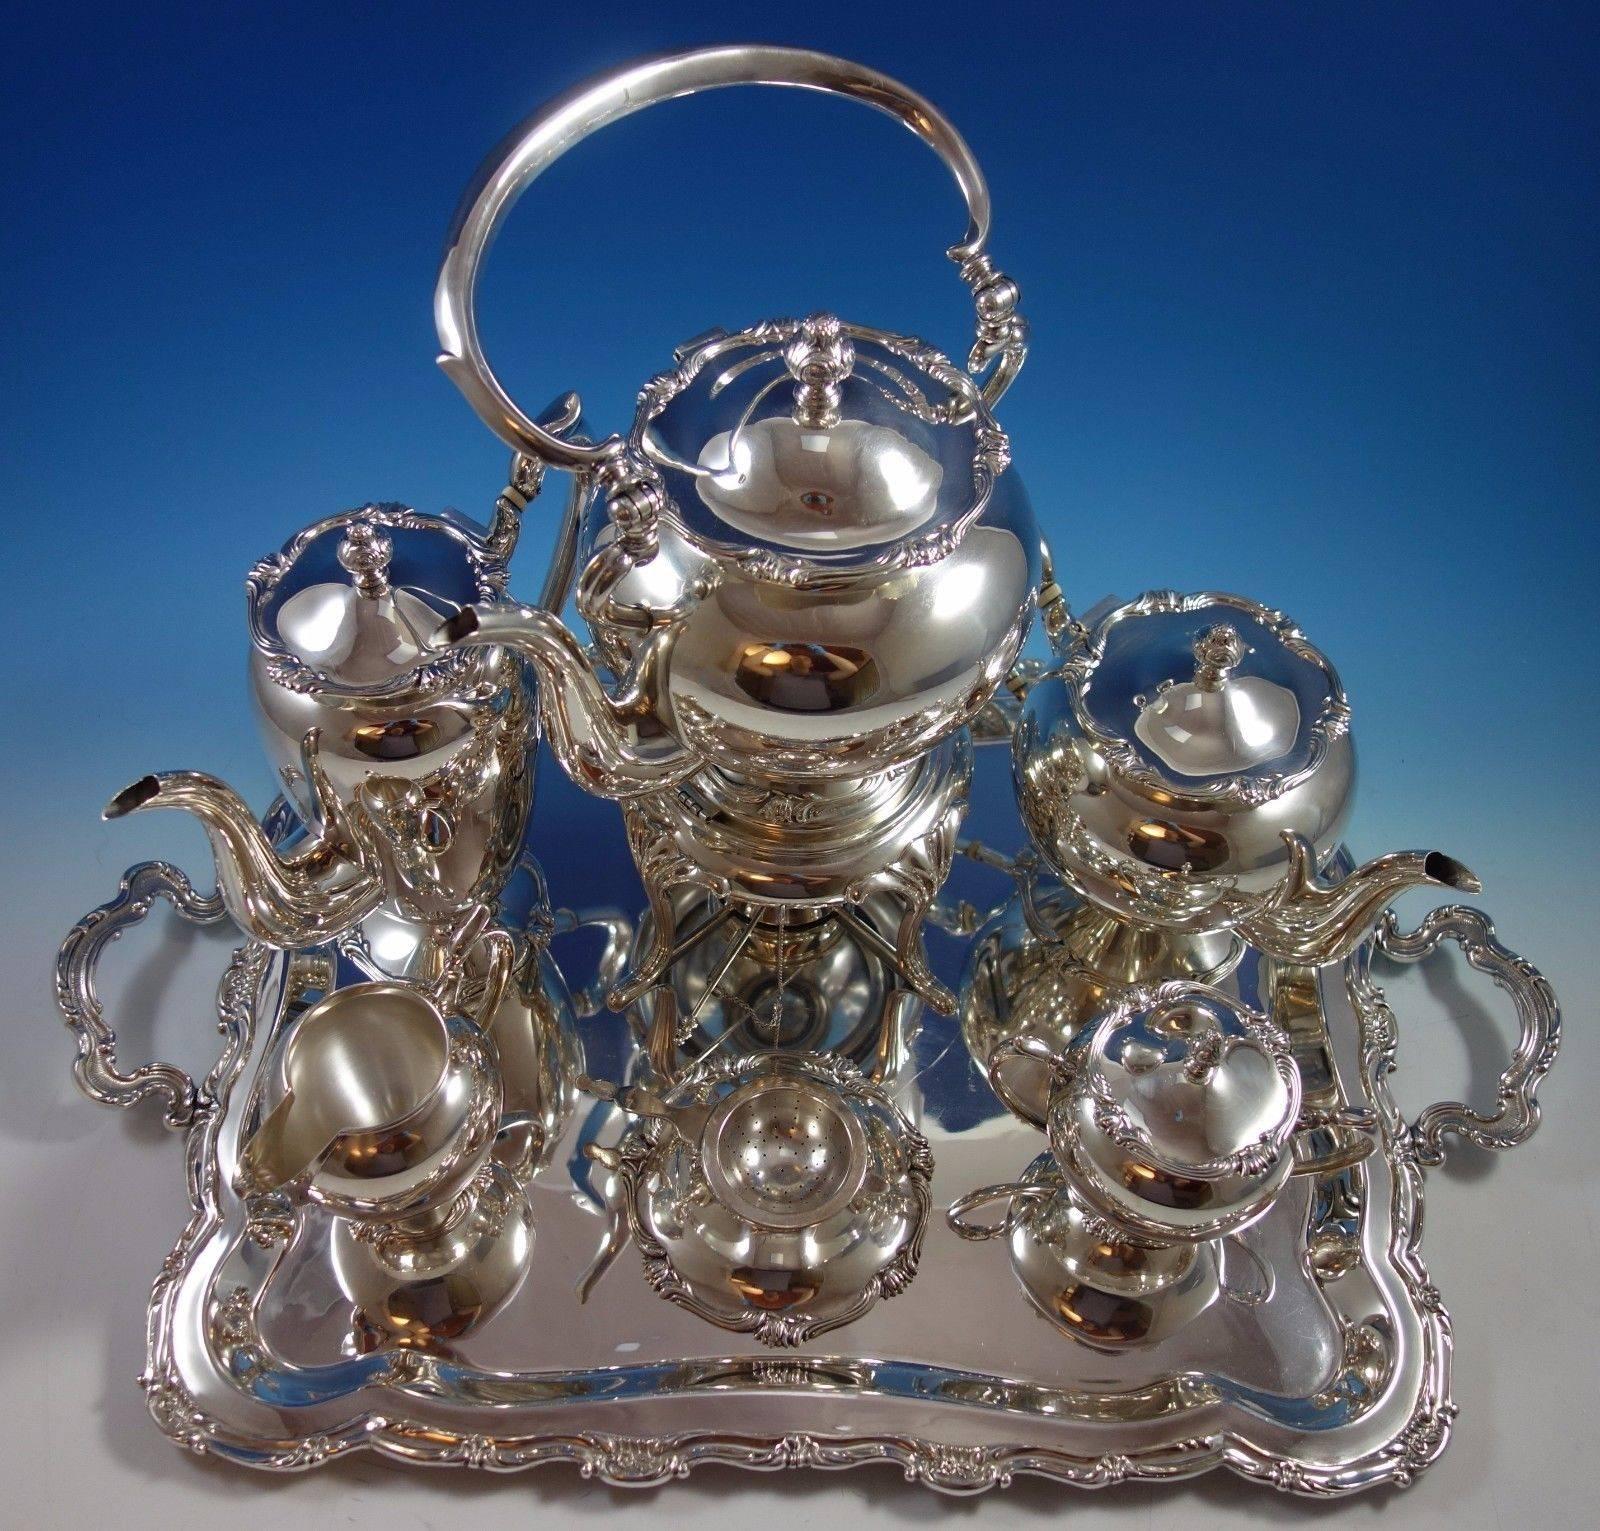 Simply beautiful San Marco by Camusso sterling silver seven-piece tea set with an elegant rectangular sterling tray. The tray has two handles, measures 25